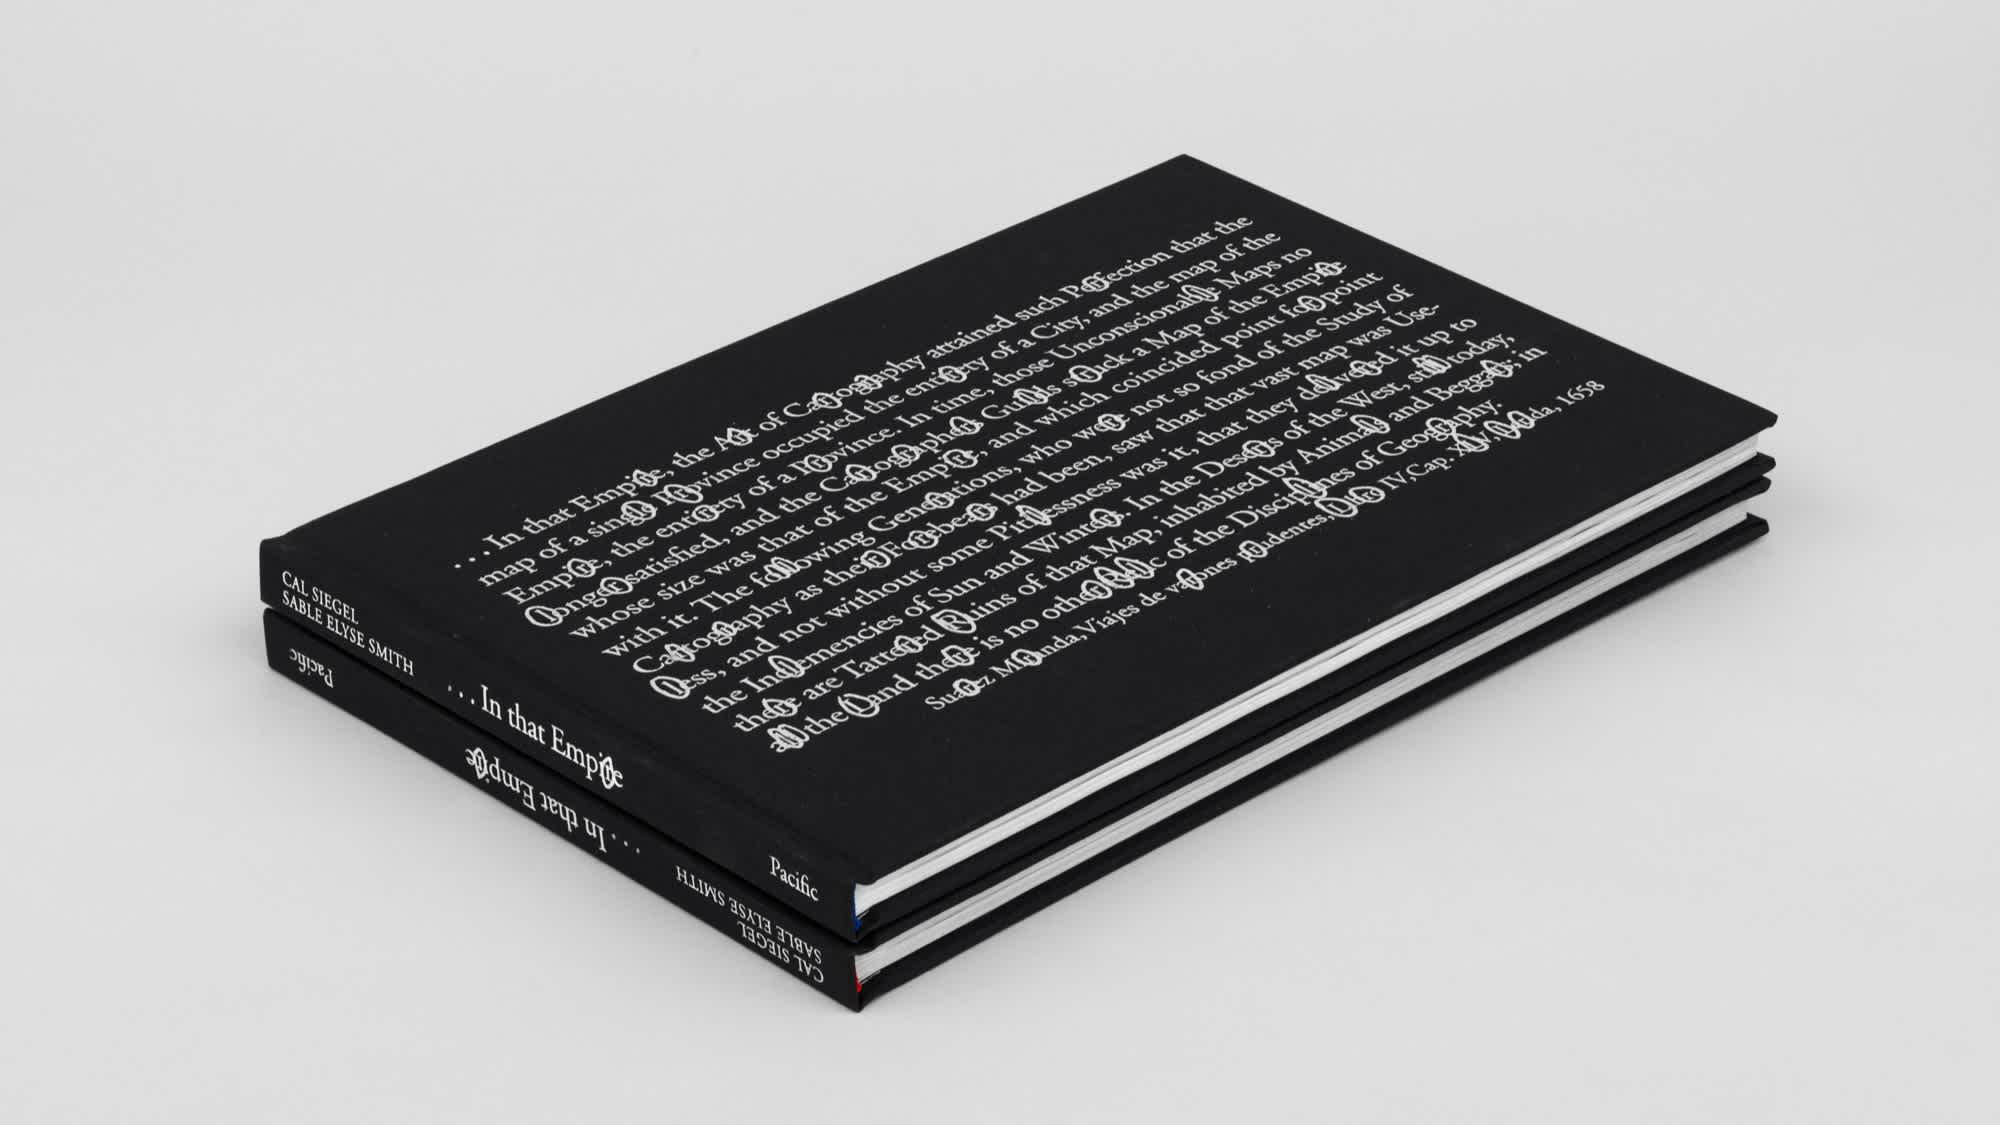 Two black rectangular books stacked on top of each other. The spines are visible.